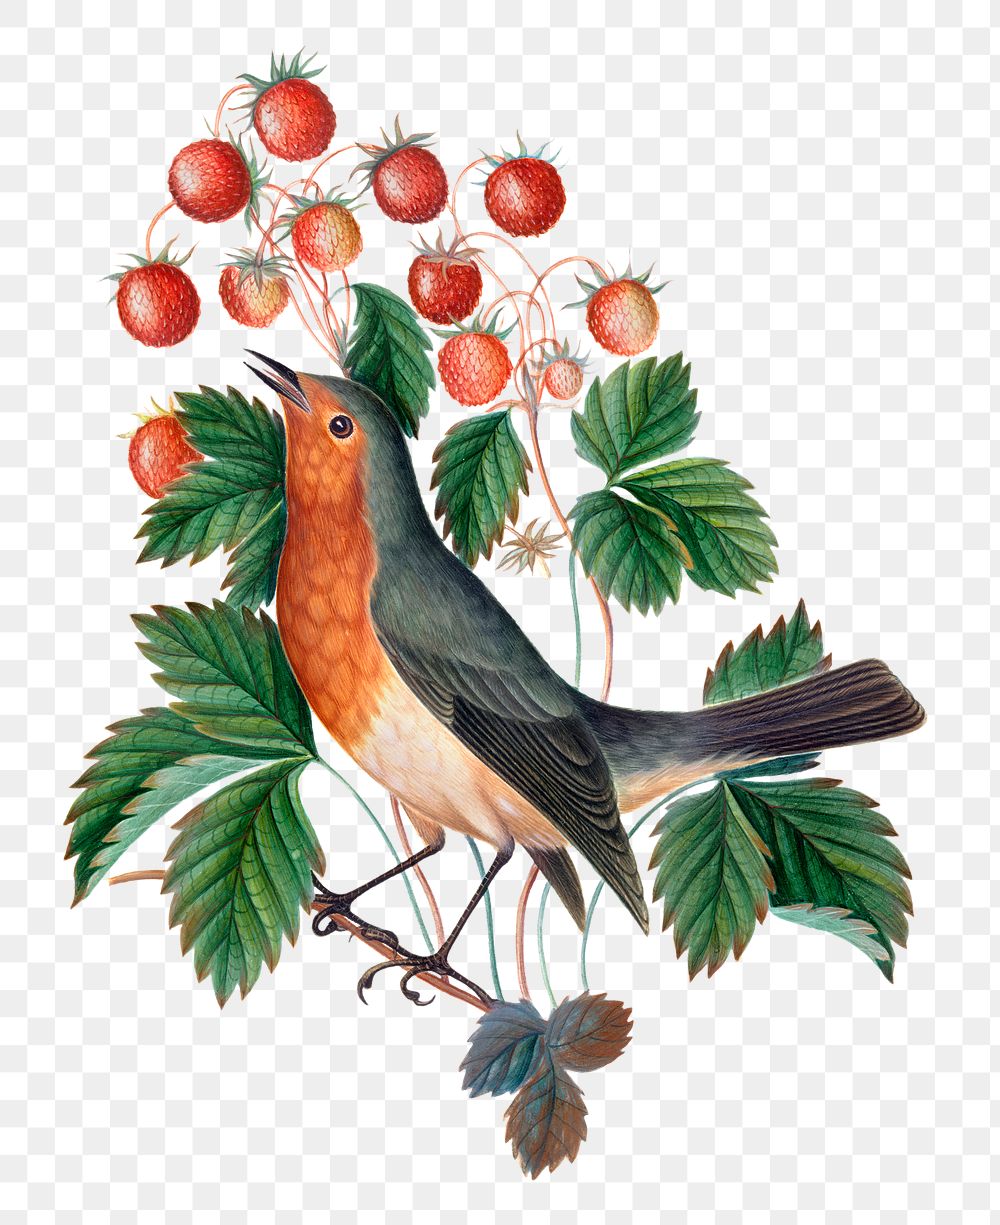 Bird png sticker, strawberry plant, watercolor painting, remixed from artworks by James Bolton